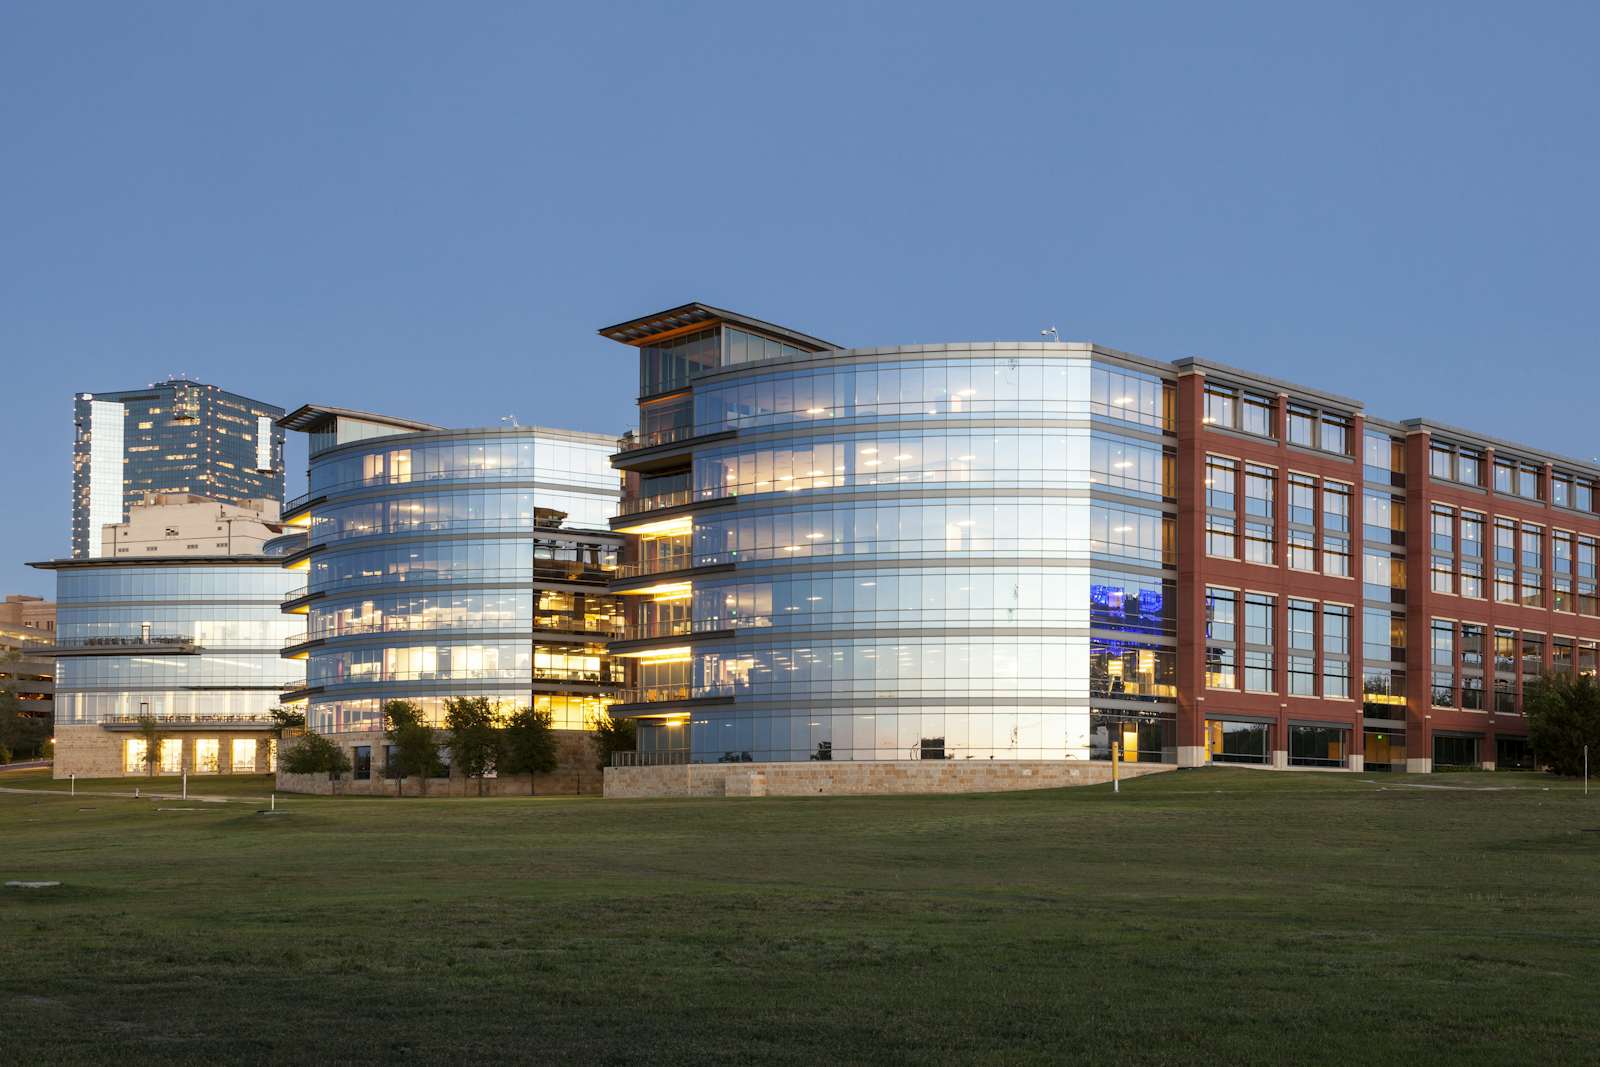 Trinity River Campus of the Tarrant County College in Fort Worth Texas